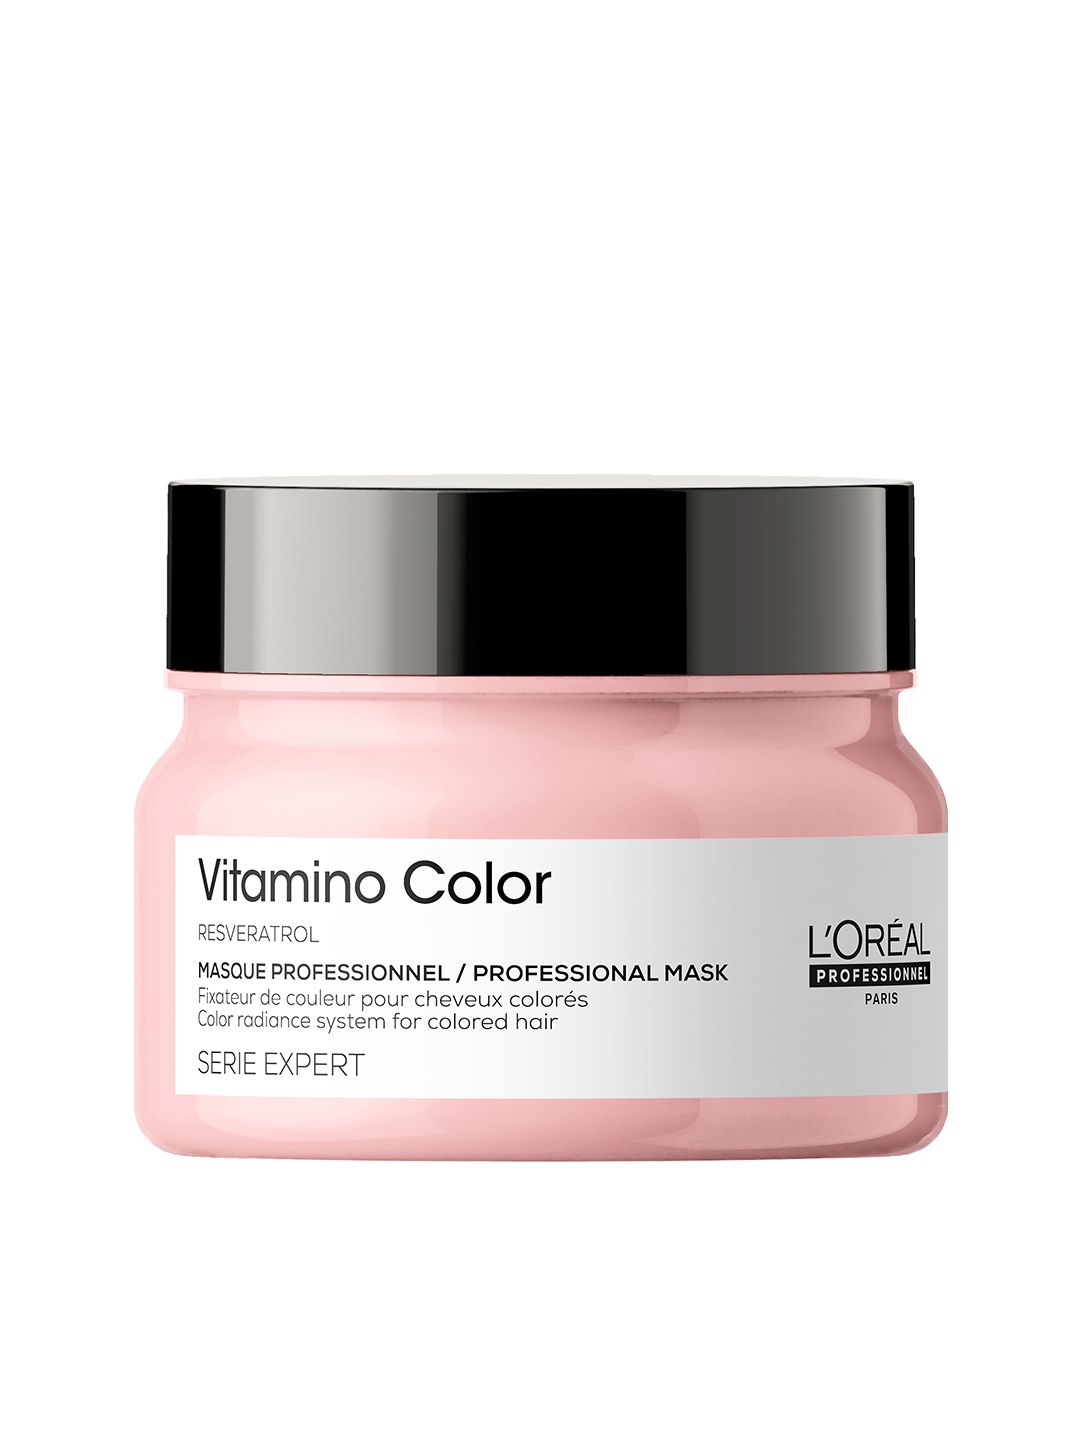 LOreal Professionnel Serie Expert Vitamino Mask 250g Price in India